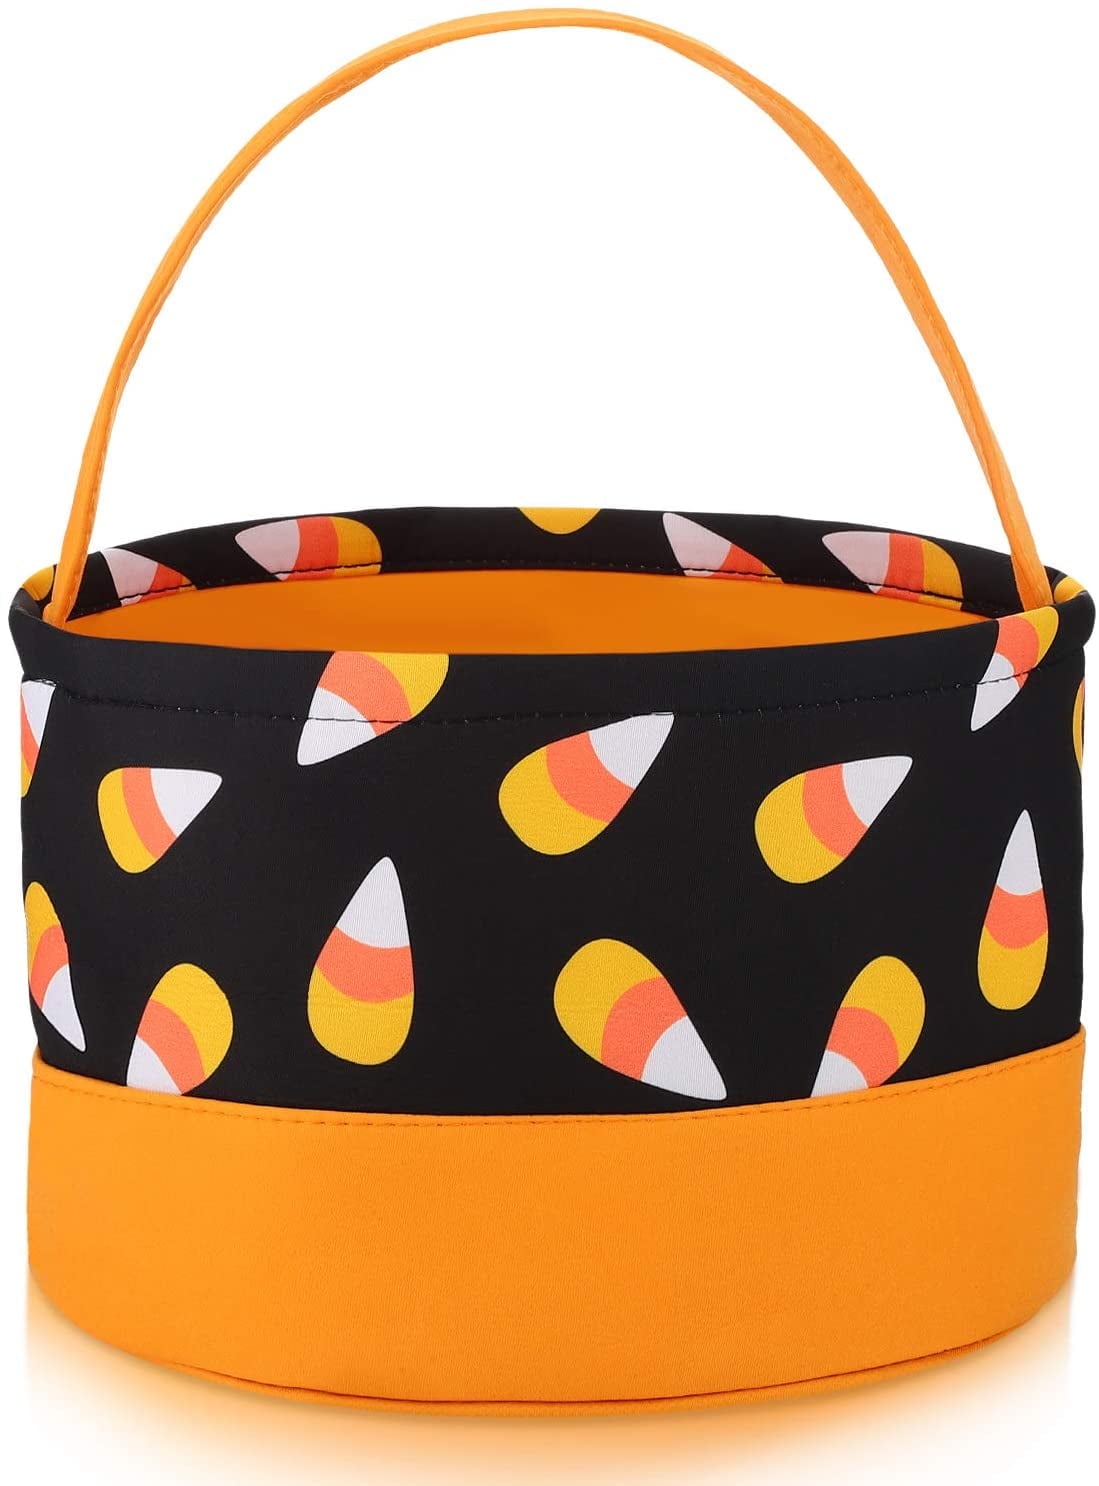 LEZMORE Halloween Trick or Treat Bags Halloween Candy Buckets Tote Bags Orange Black with Candy Corn Halloween Party Favor Bags for Halloween Supplies - image 1 of 7